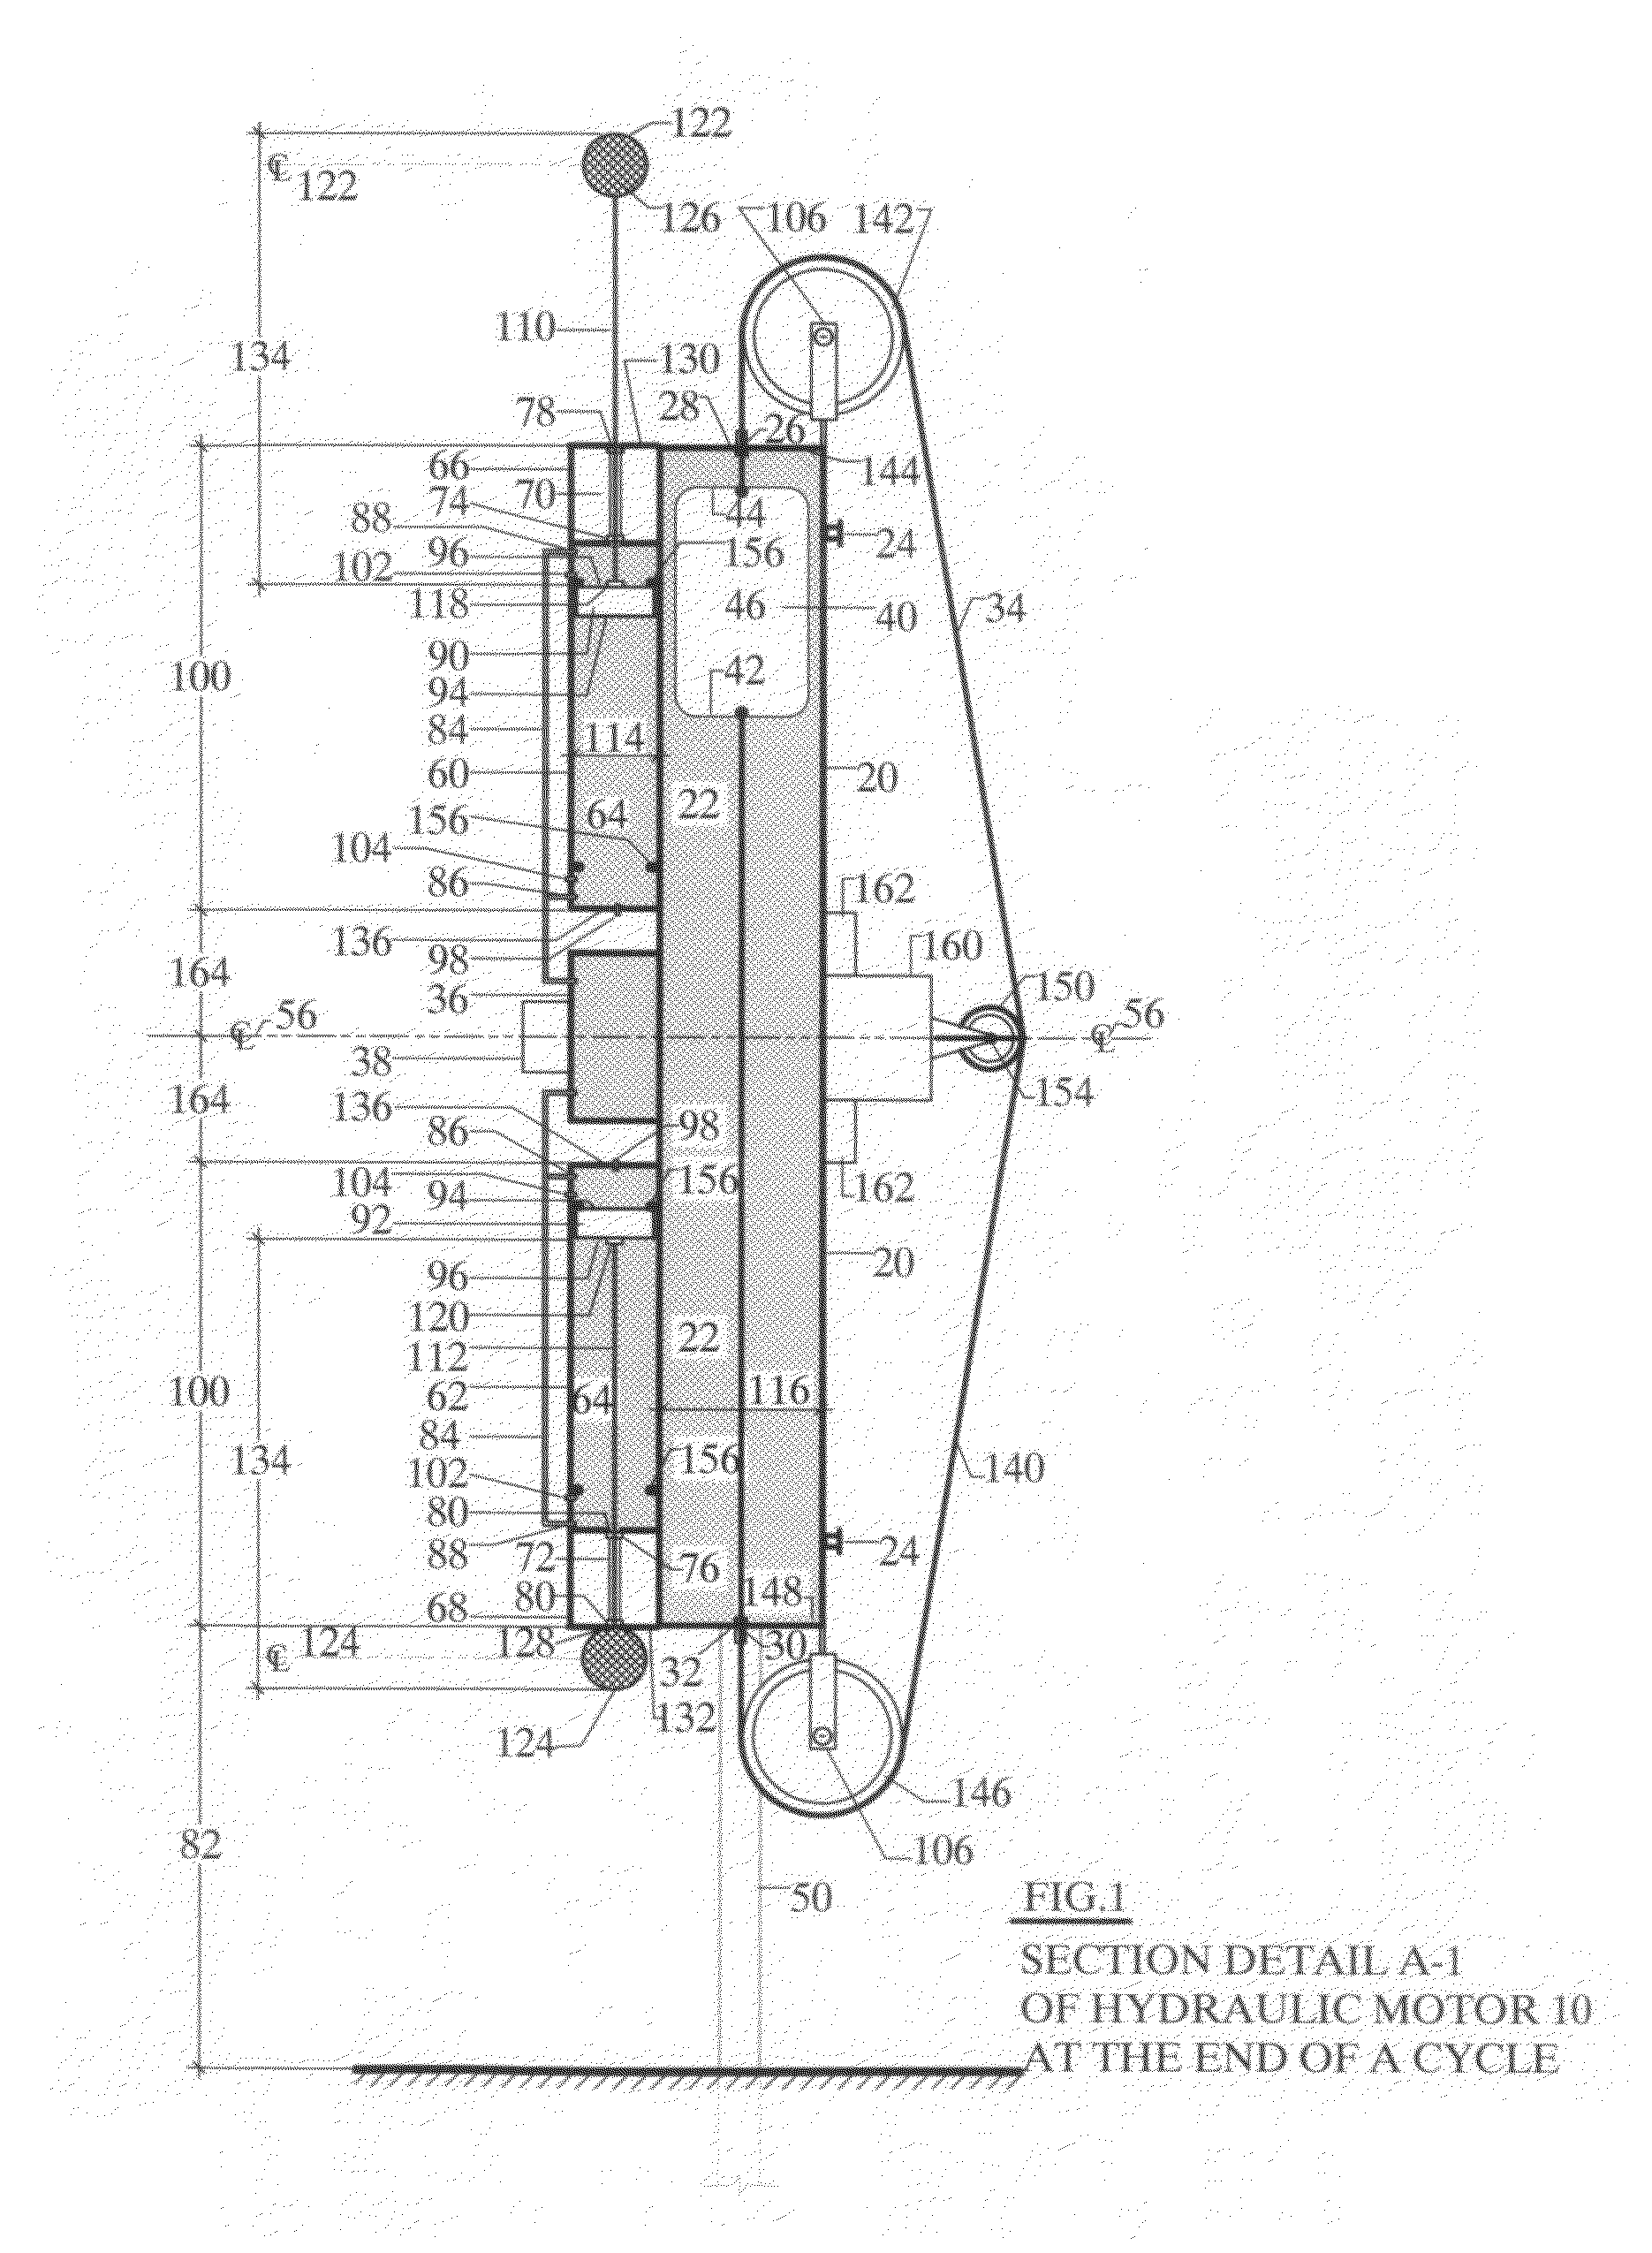 Hydraulic motor using buoyant and gravitational forces to generate kinetic energy